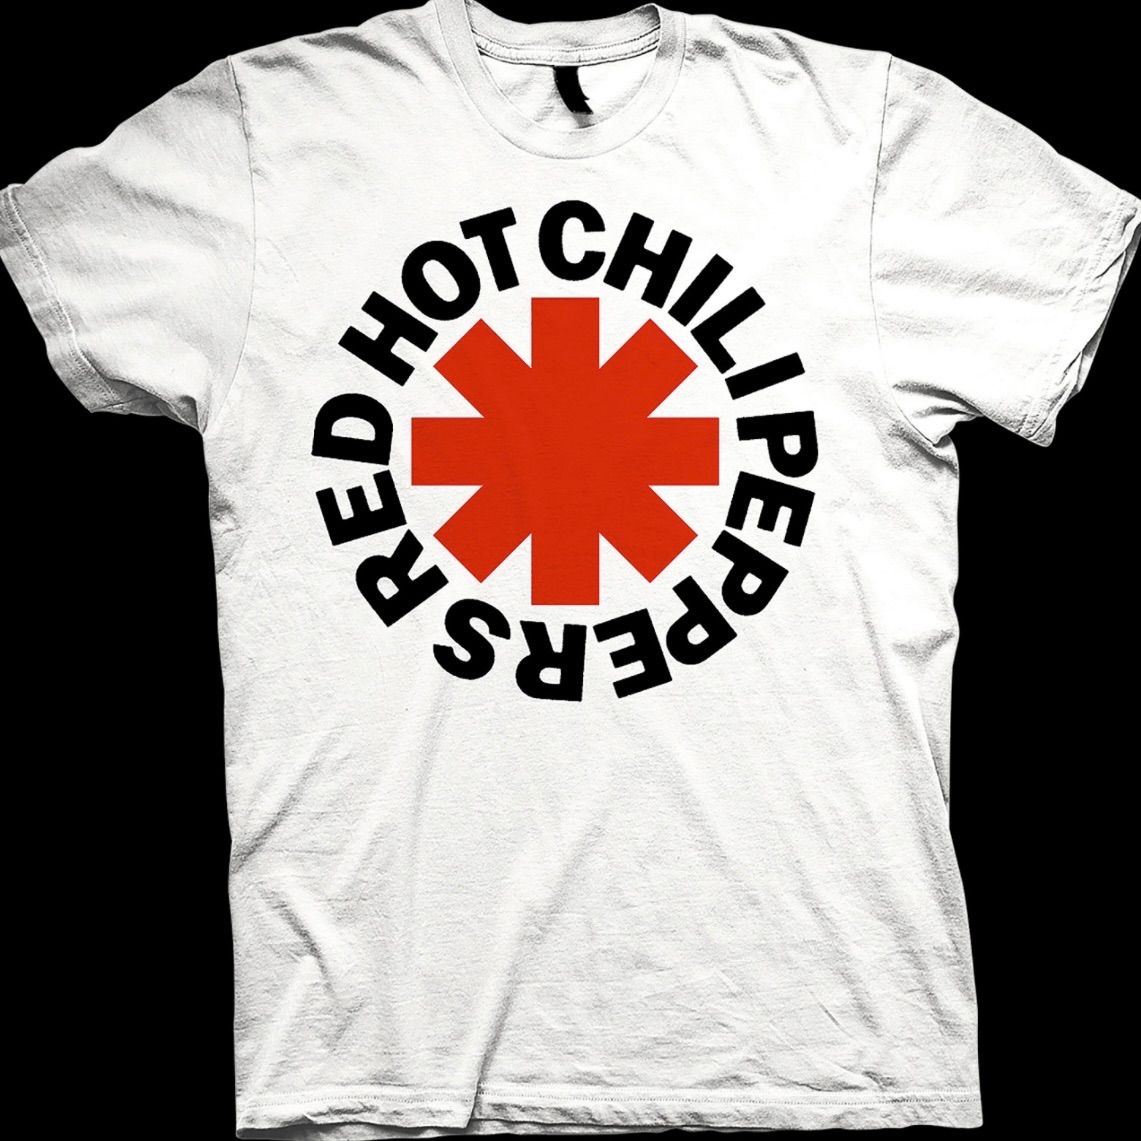 RED HOT CHILI PEPPERS レッチリ レッドホットチリペッパーズ ロゴ